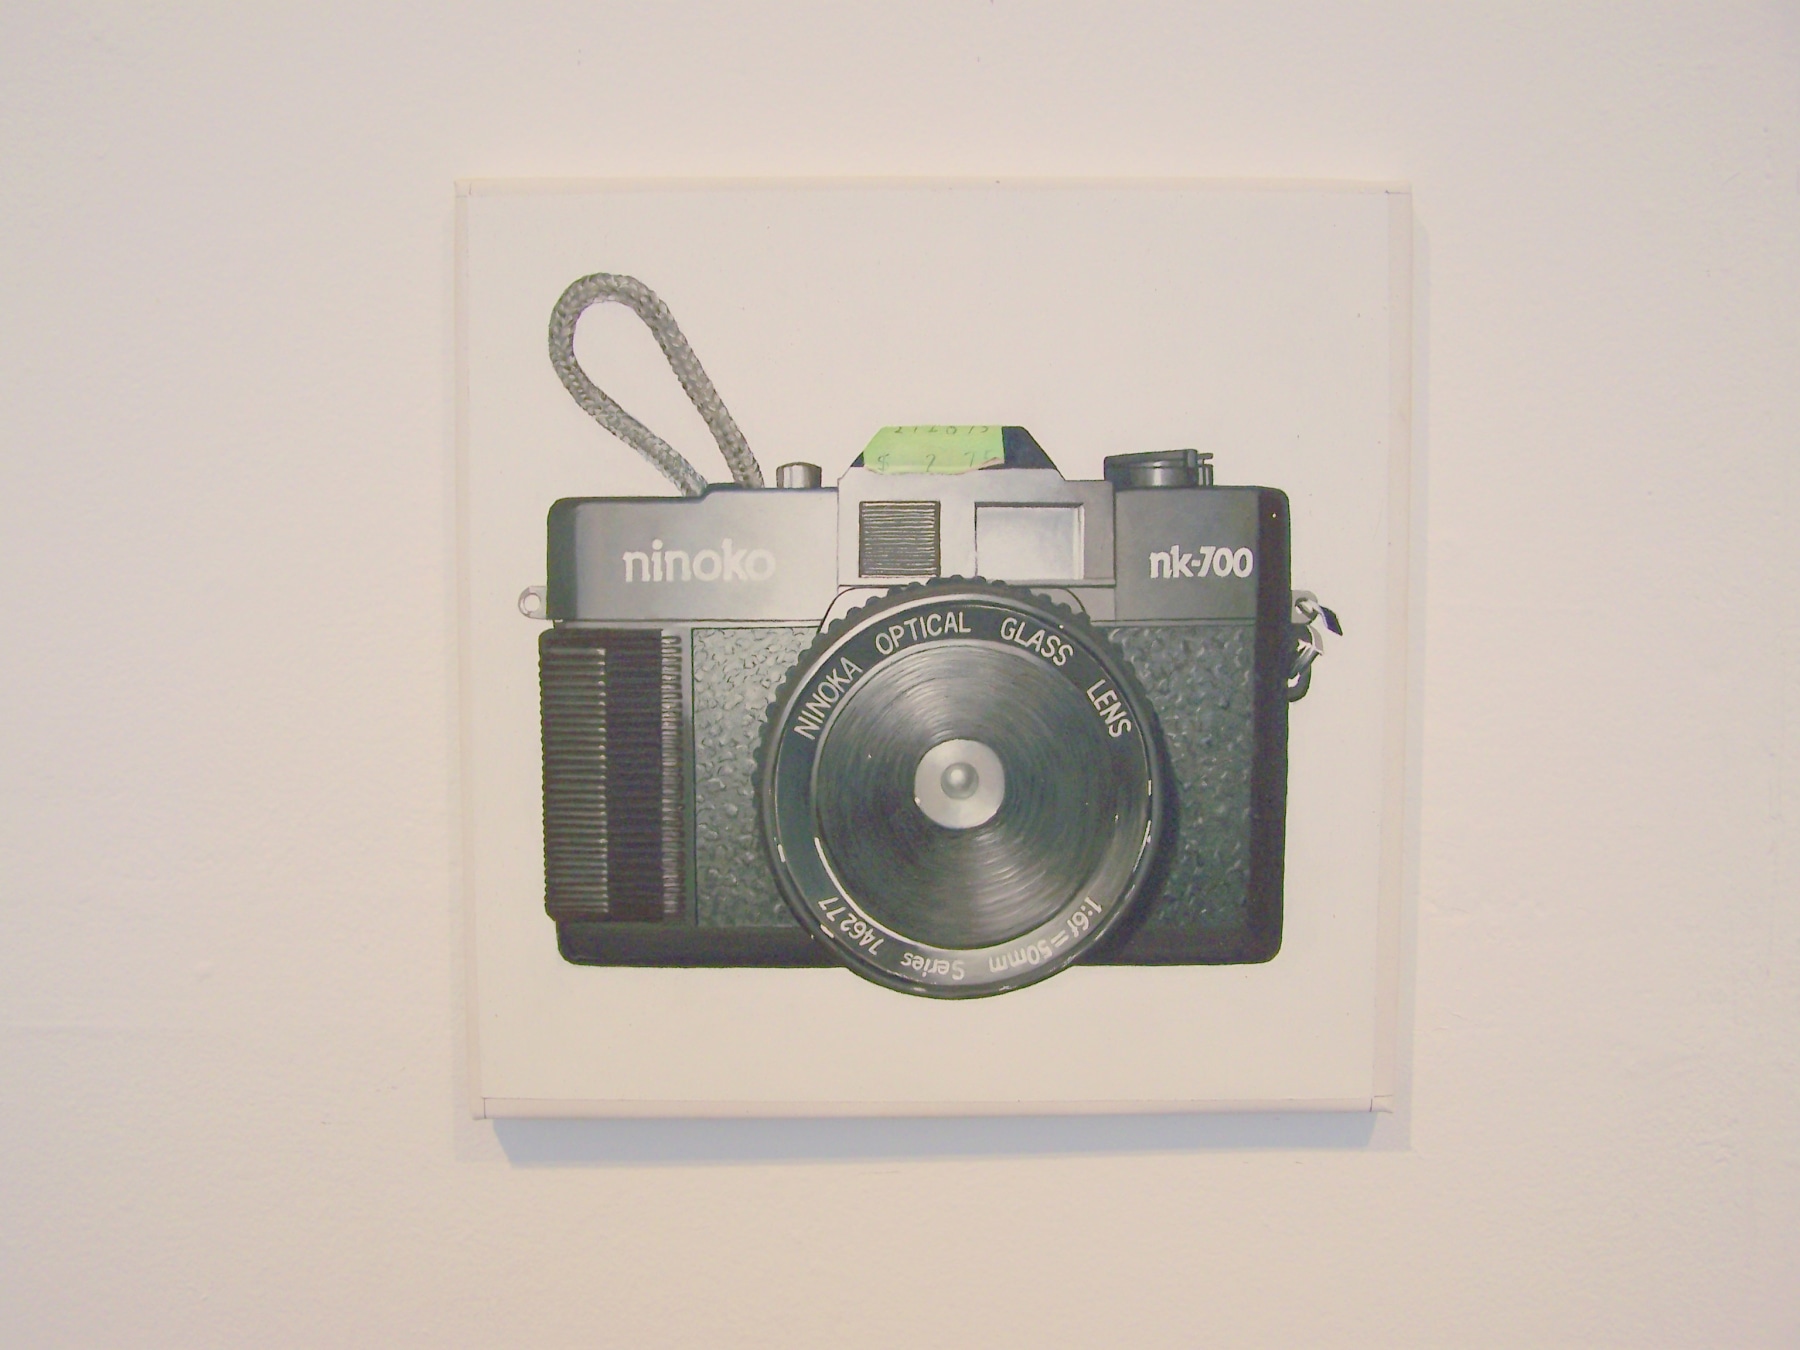 painting of 35mm camera